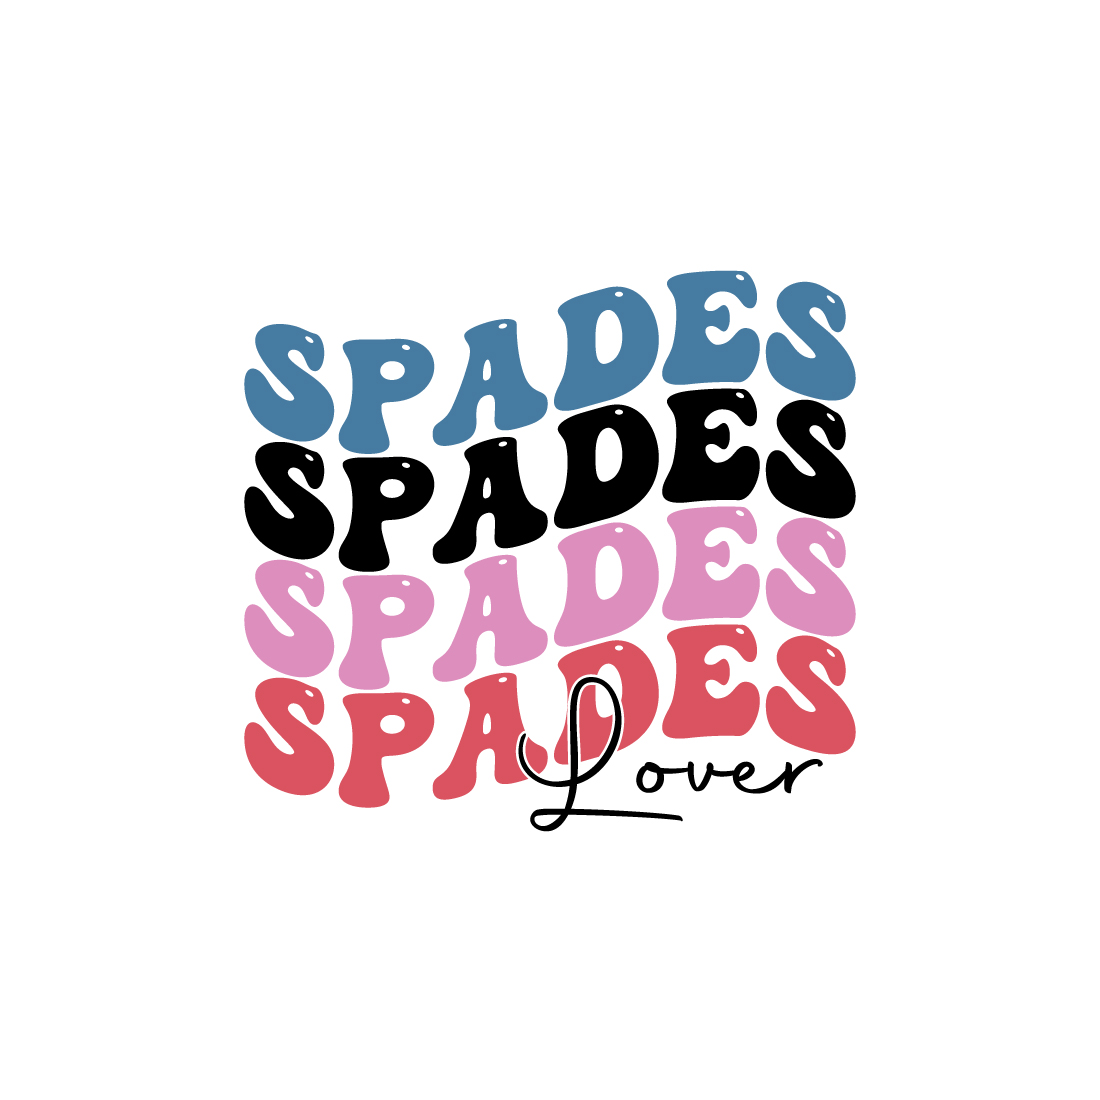 Spades lover indoor game retro typography design for t-shirts, cards, frame artwork, phone cases, bags, mugs, stickers, tumblers, print, etc preview image.